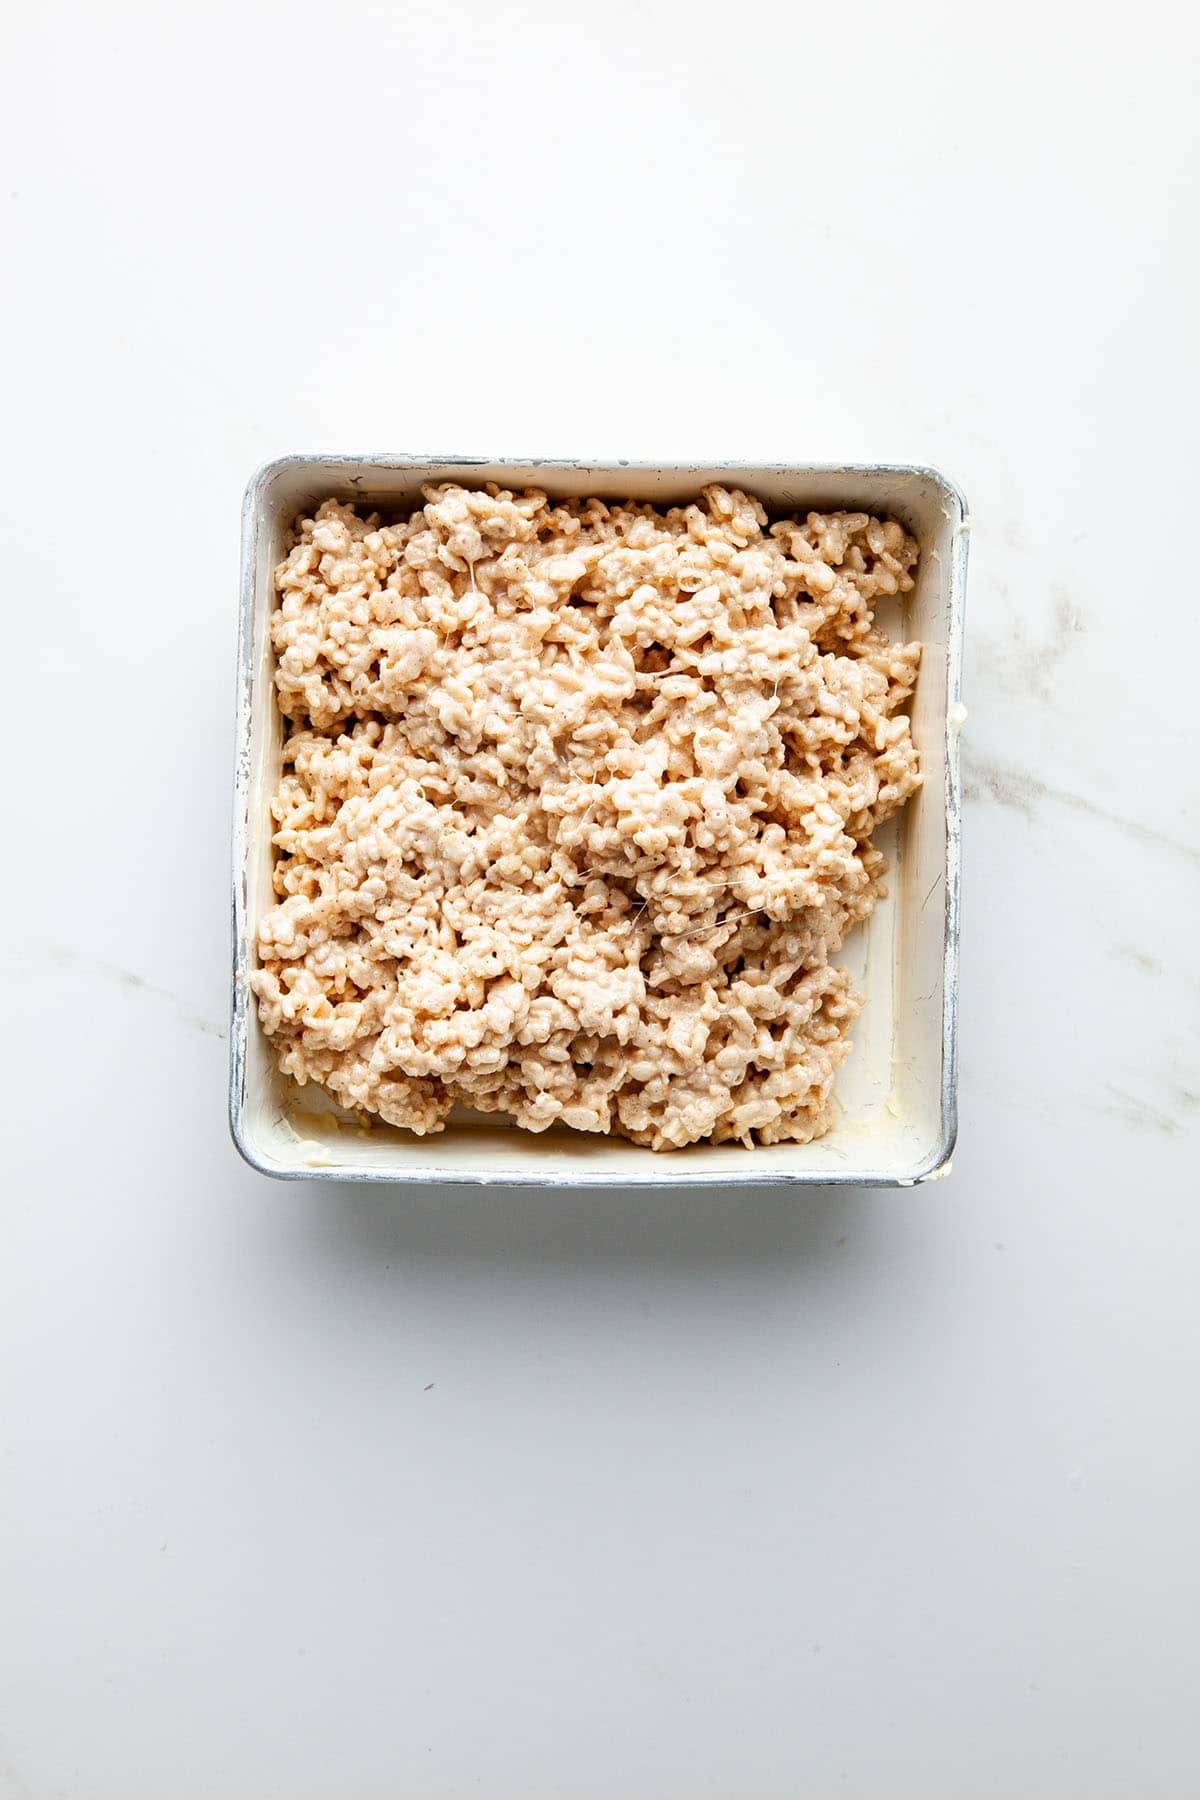 A pan of Rice Krispie treats before smoothing.